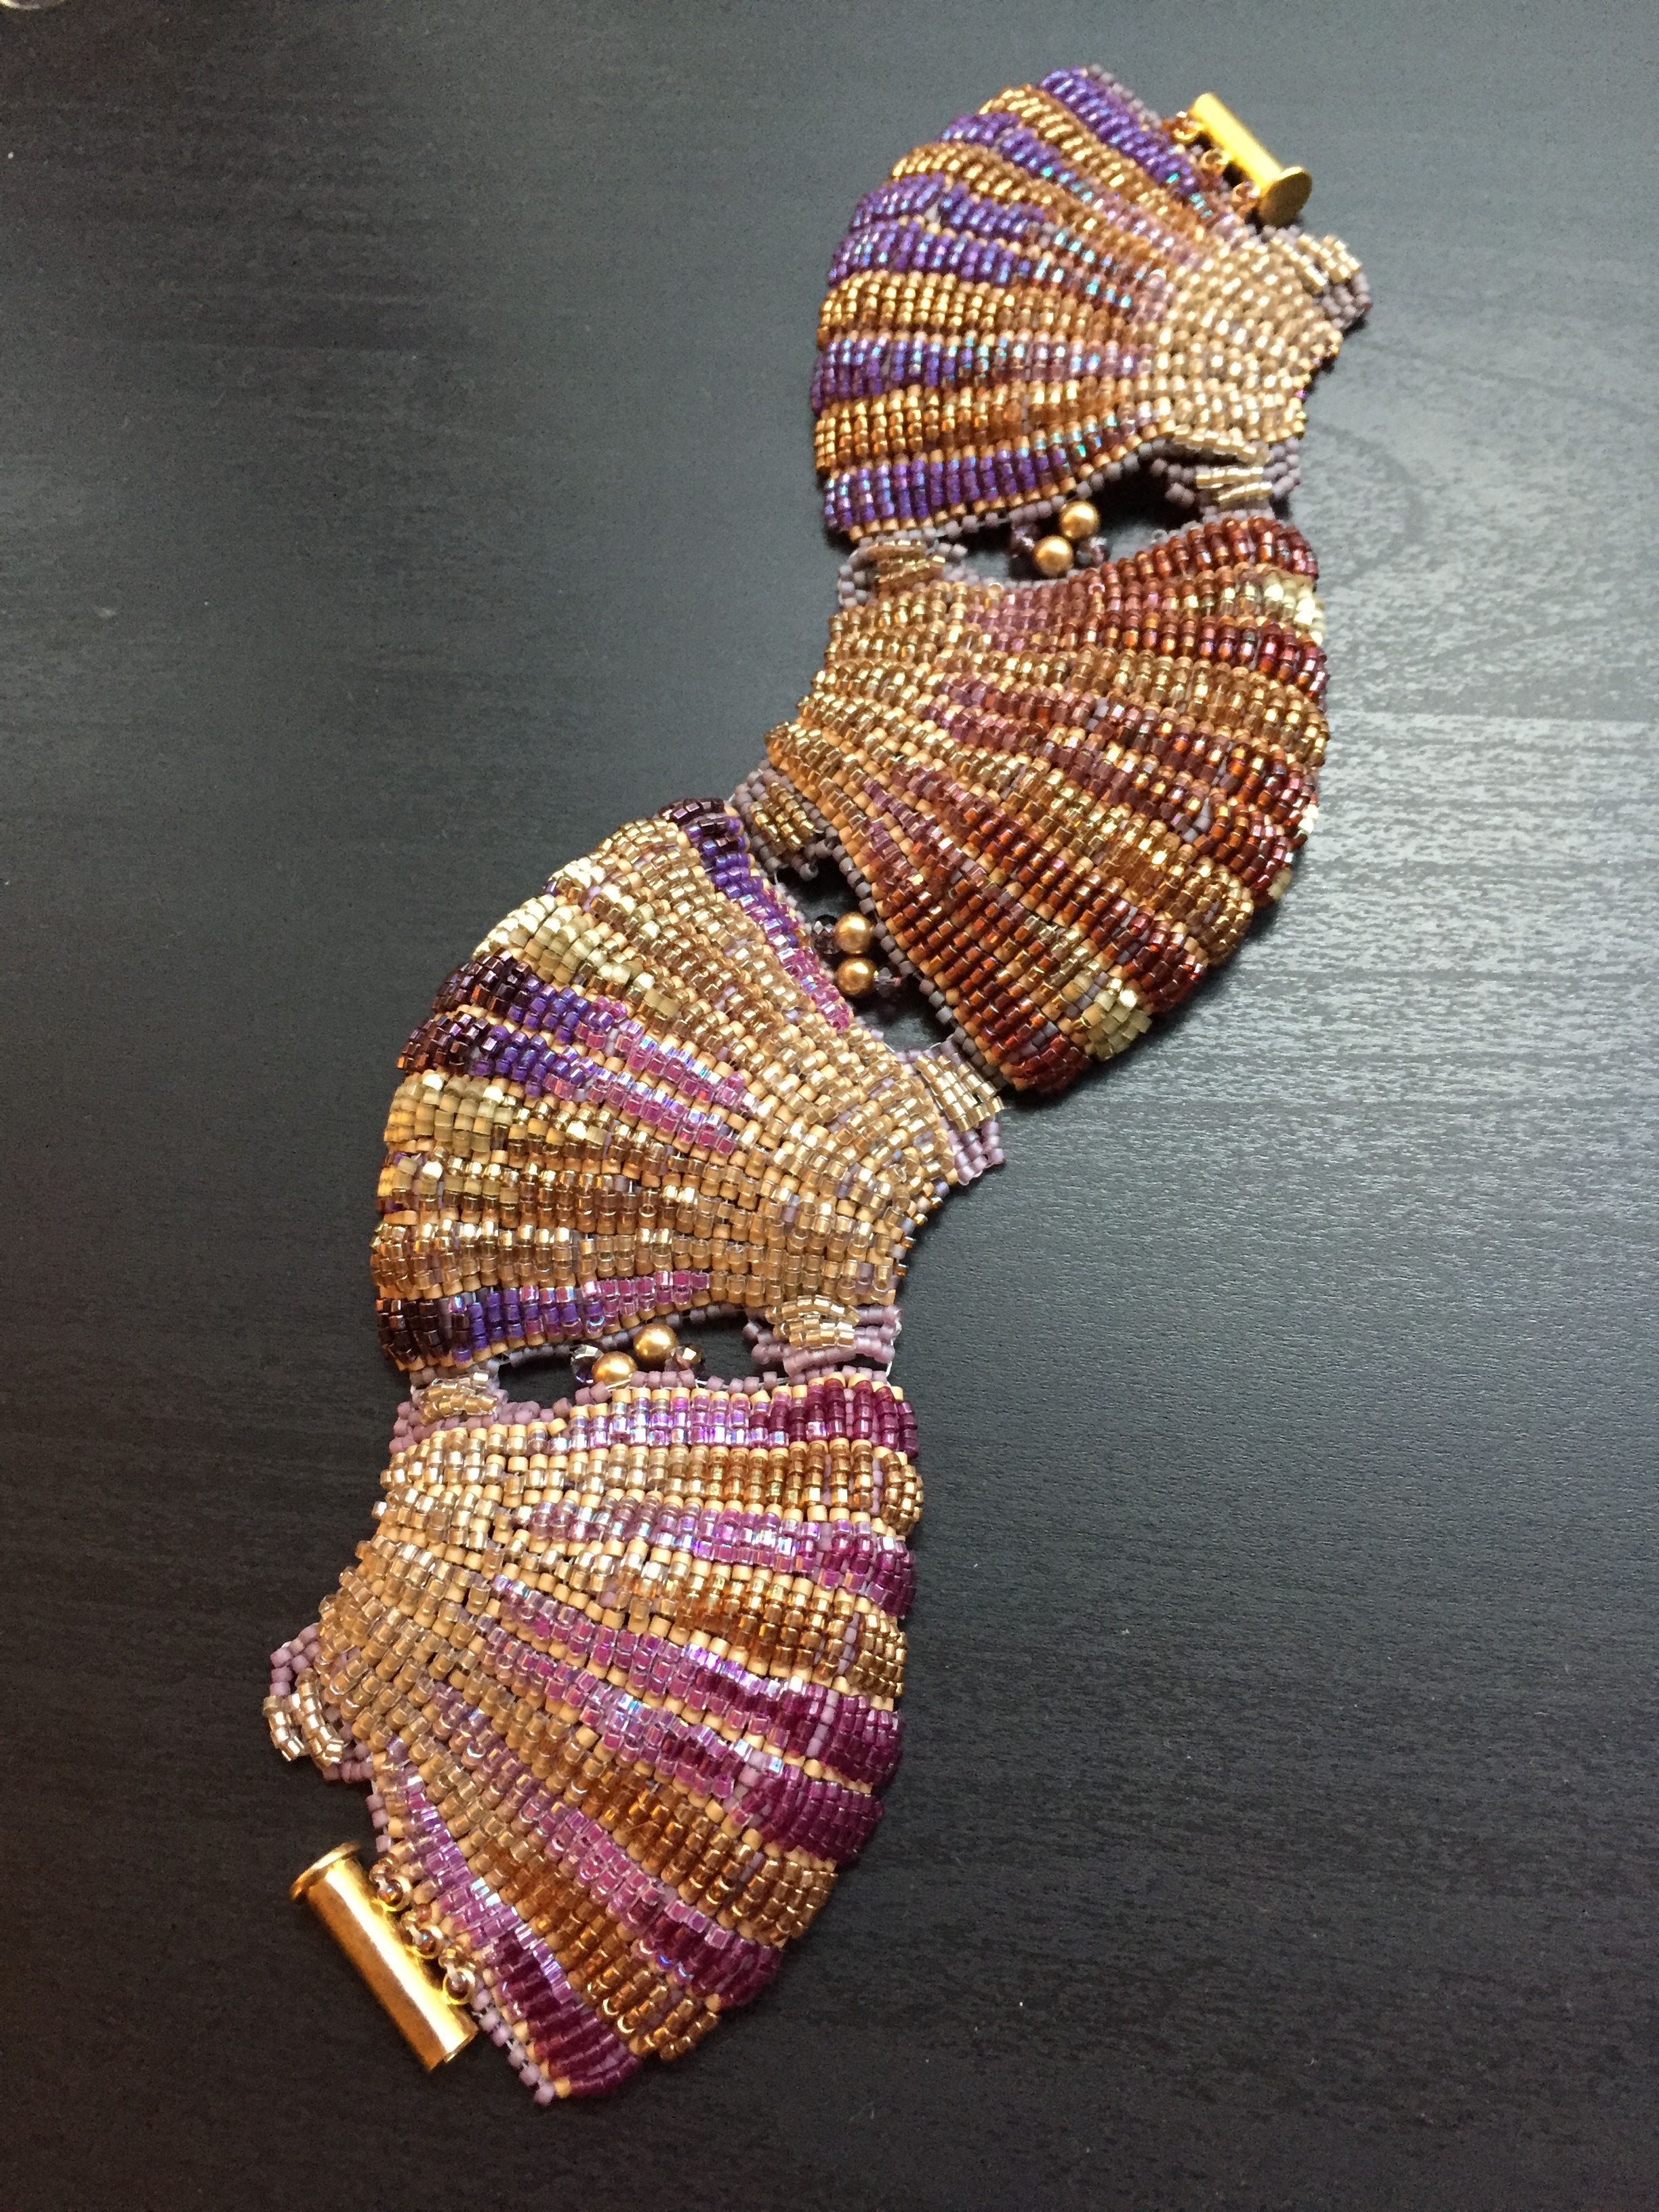 A cuff bracelet made of four beaded shell shapes, placed in the shape of a wave. Strong purples and bright golds throughout.